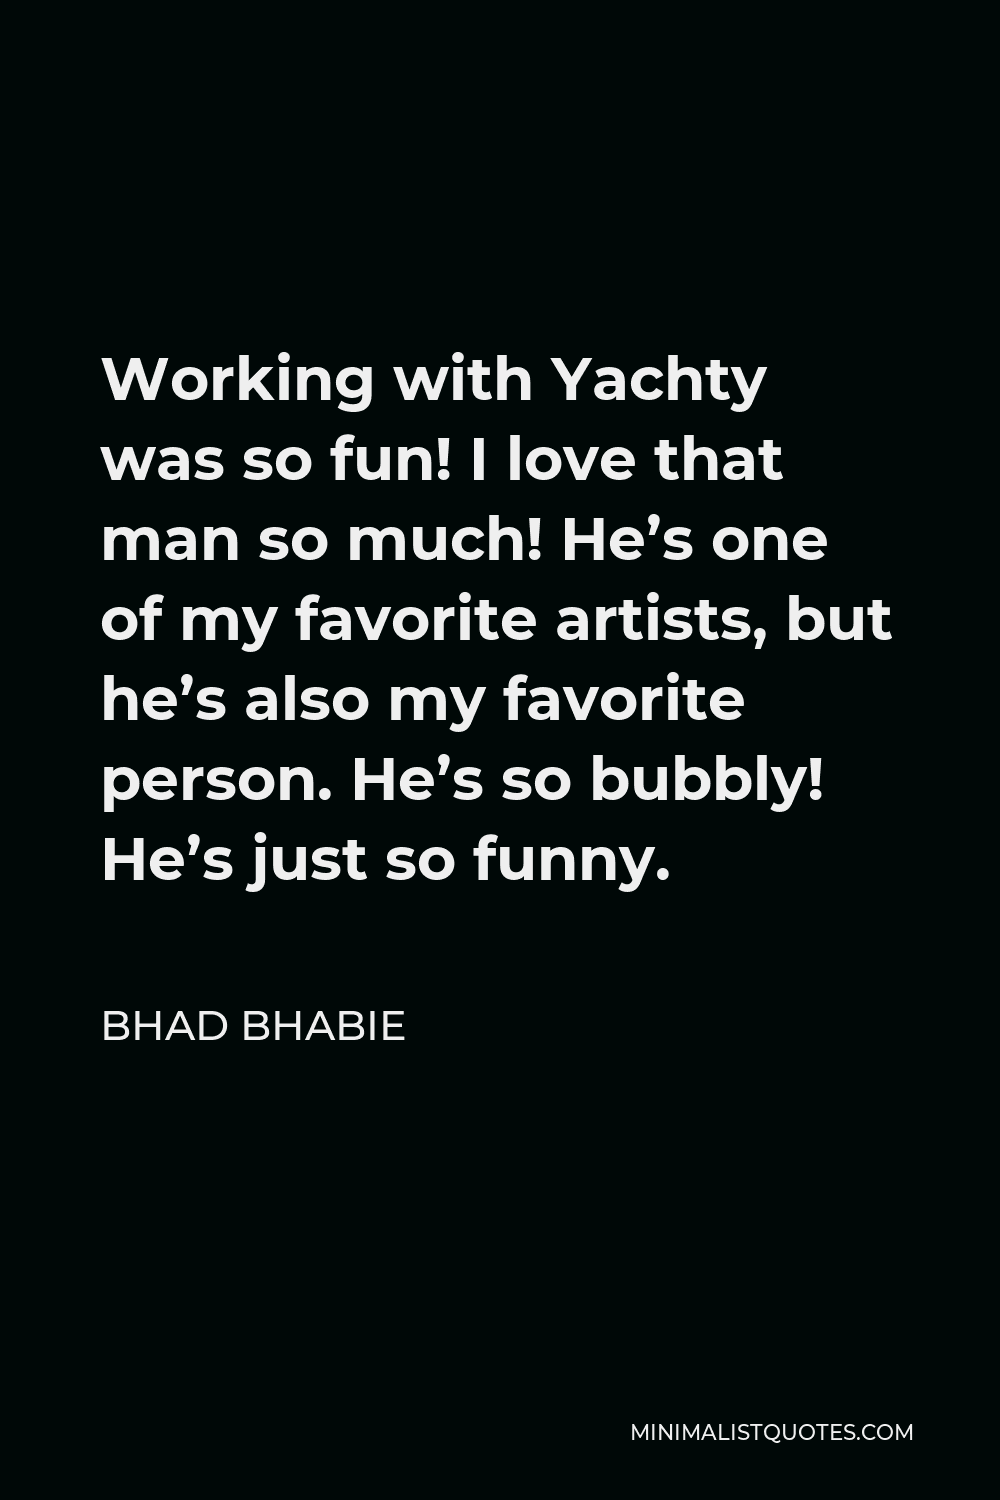 Bhad Bhabie Quote - Working with Yachty was so fun! I love that man so much! He’s one of my favorite artists, but he’s also my favorite person. He’s so bubbly! He’s just so funny.